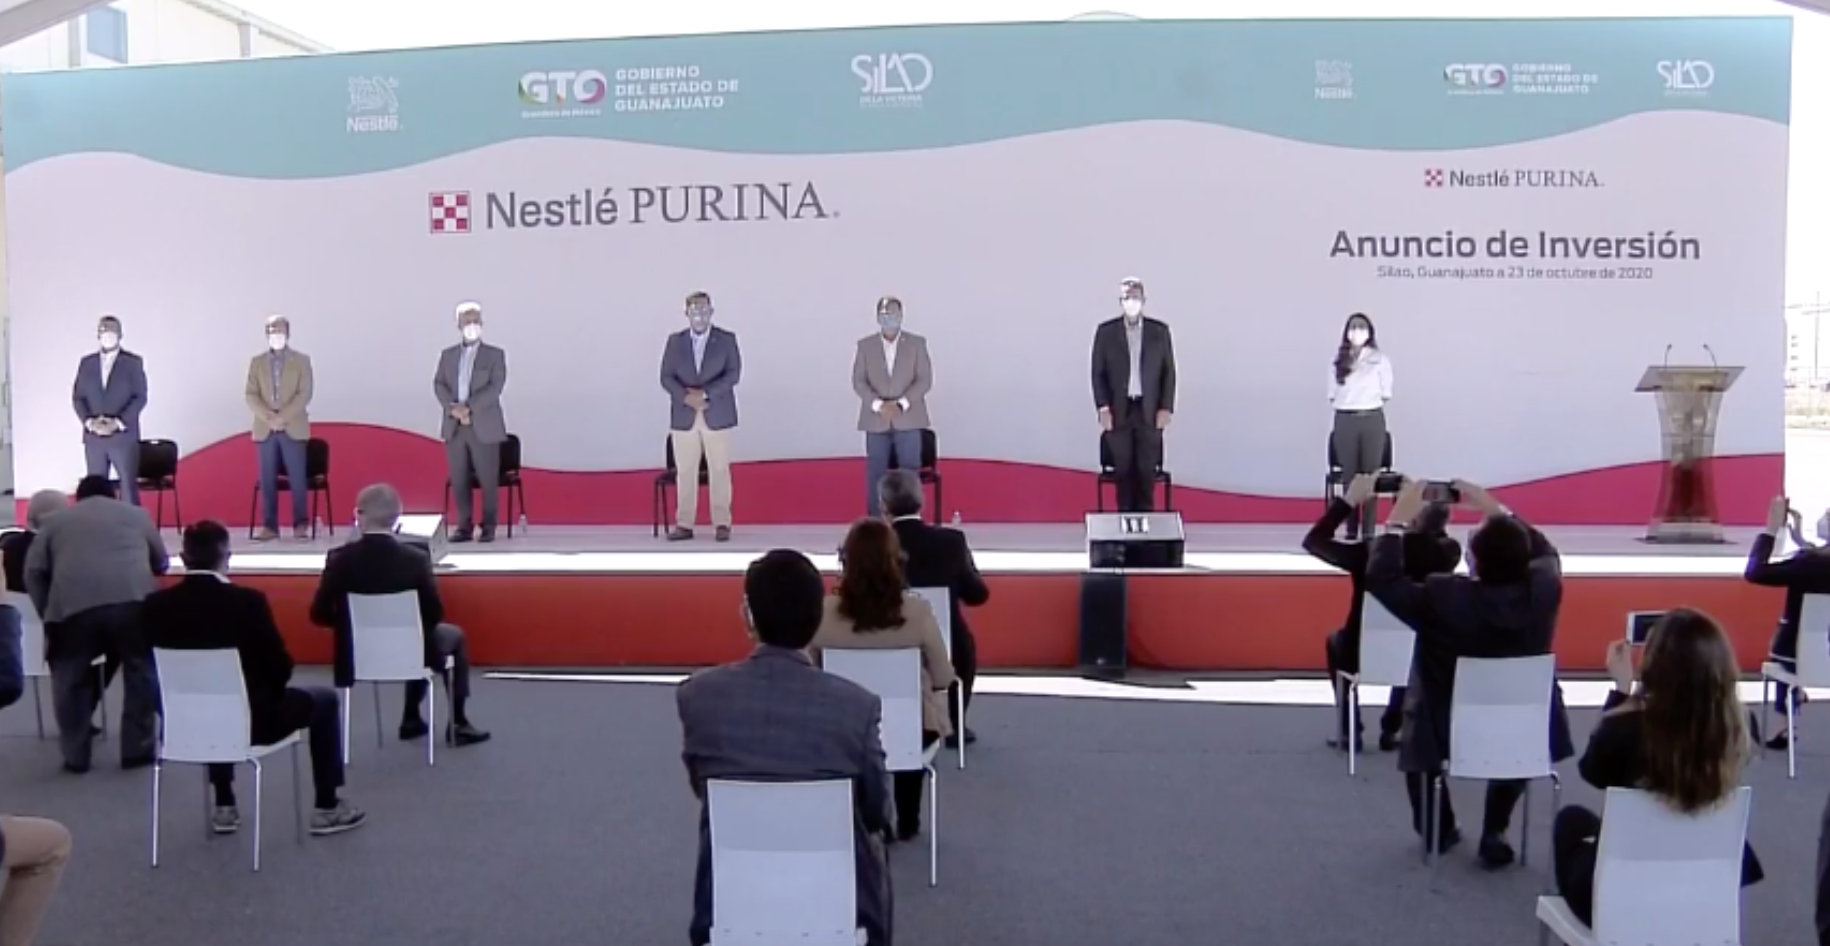 Nestlé Purina PetCare Silao, is positioned as the plant with the greatest technological advance